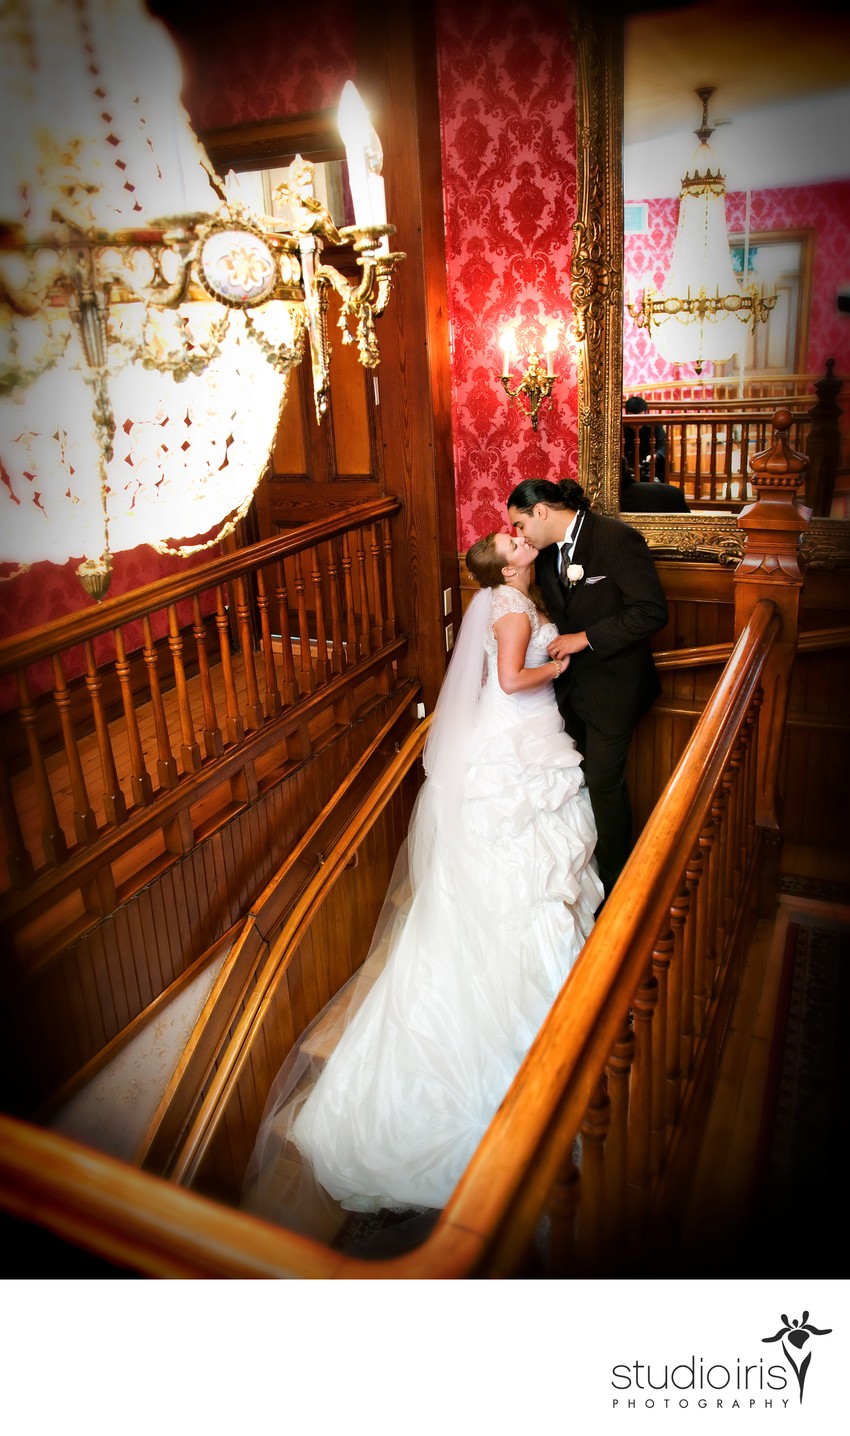 newlyweds kissing in the stairwell after their wedding at Chateau Saint Antoine